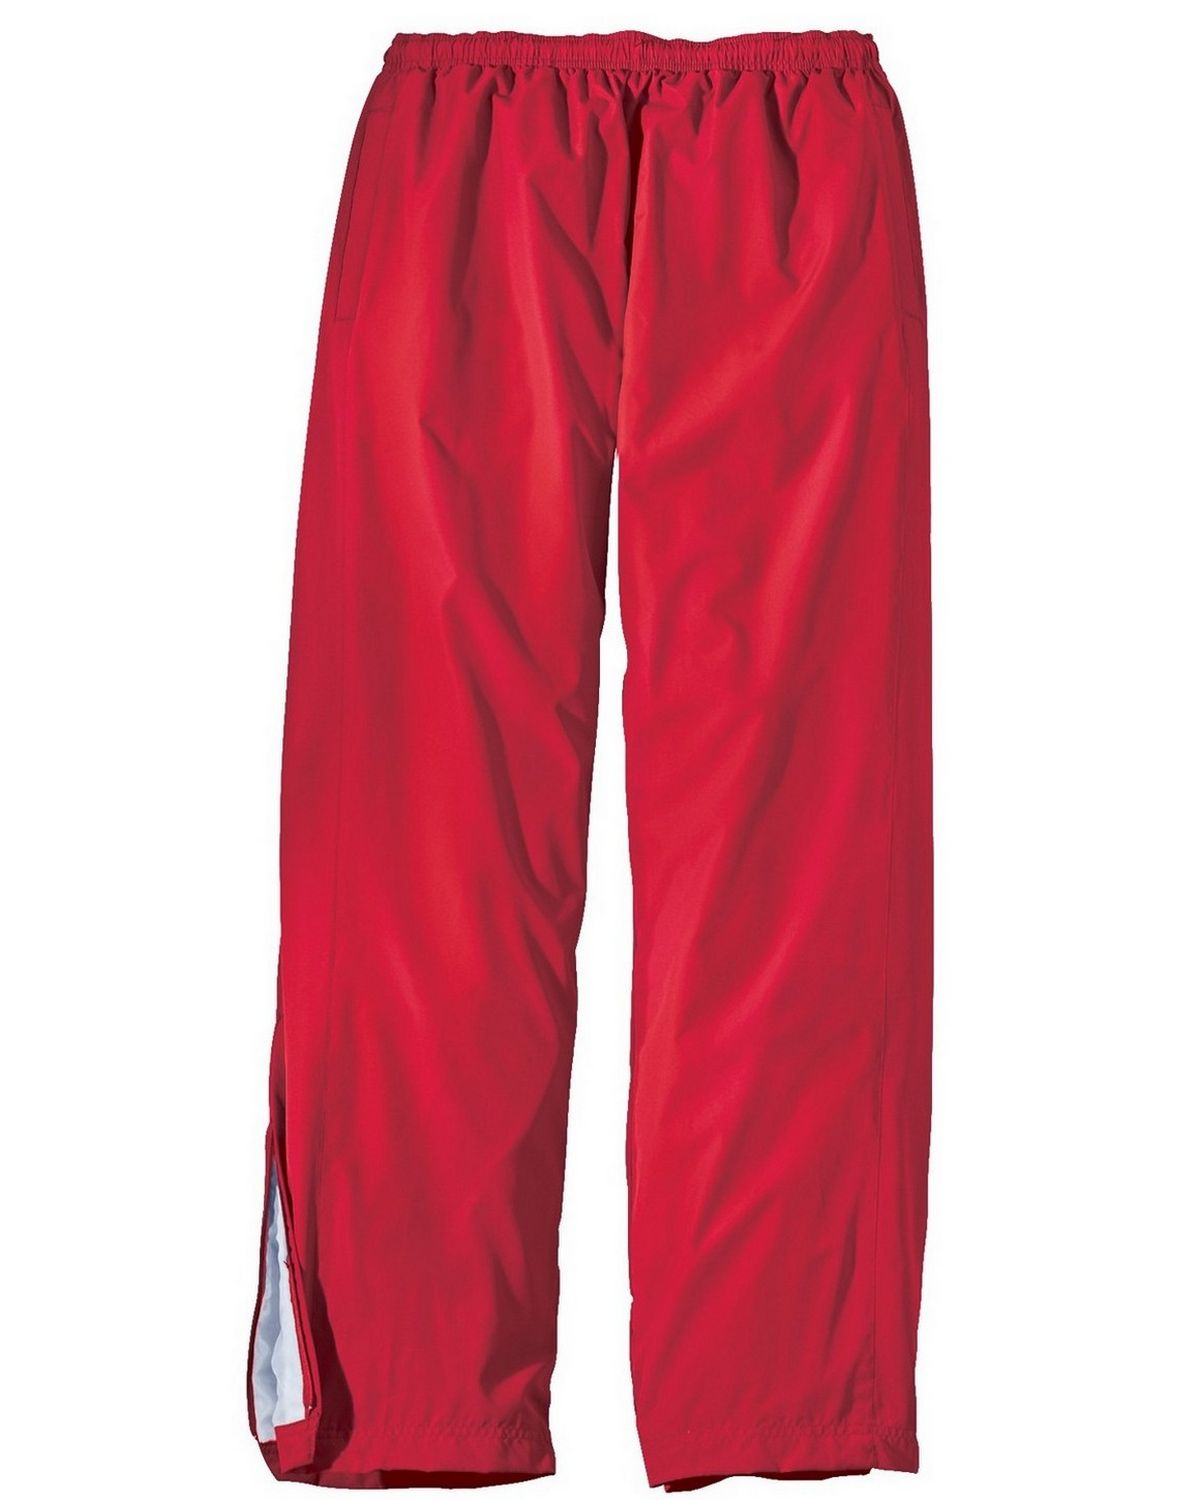 Sport-Tek YPST74 Youth Wind Pants by Port Authority - ApparelnBags.com